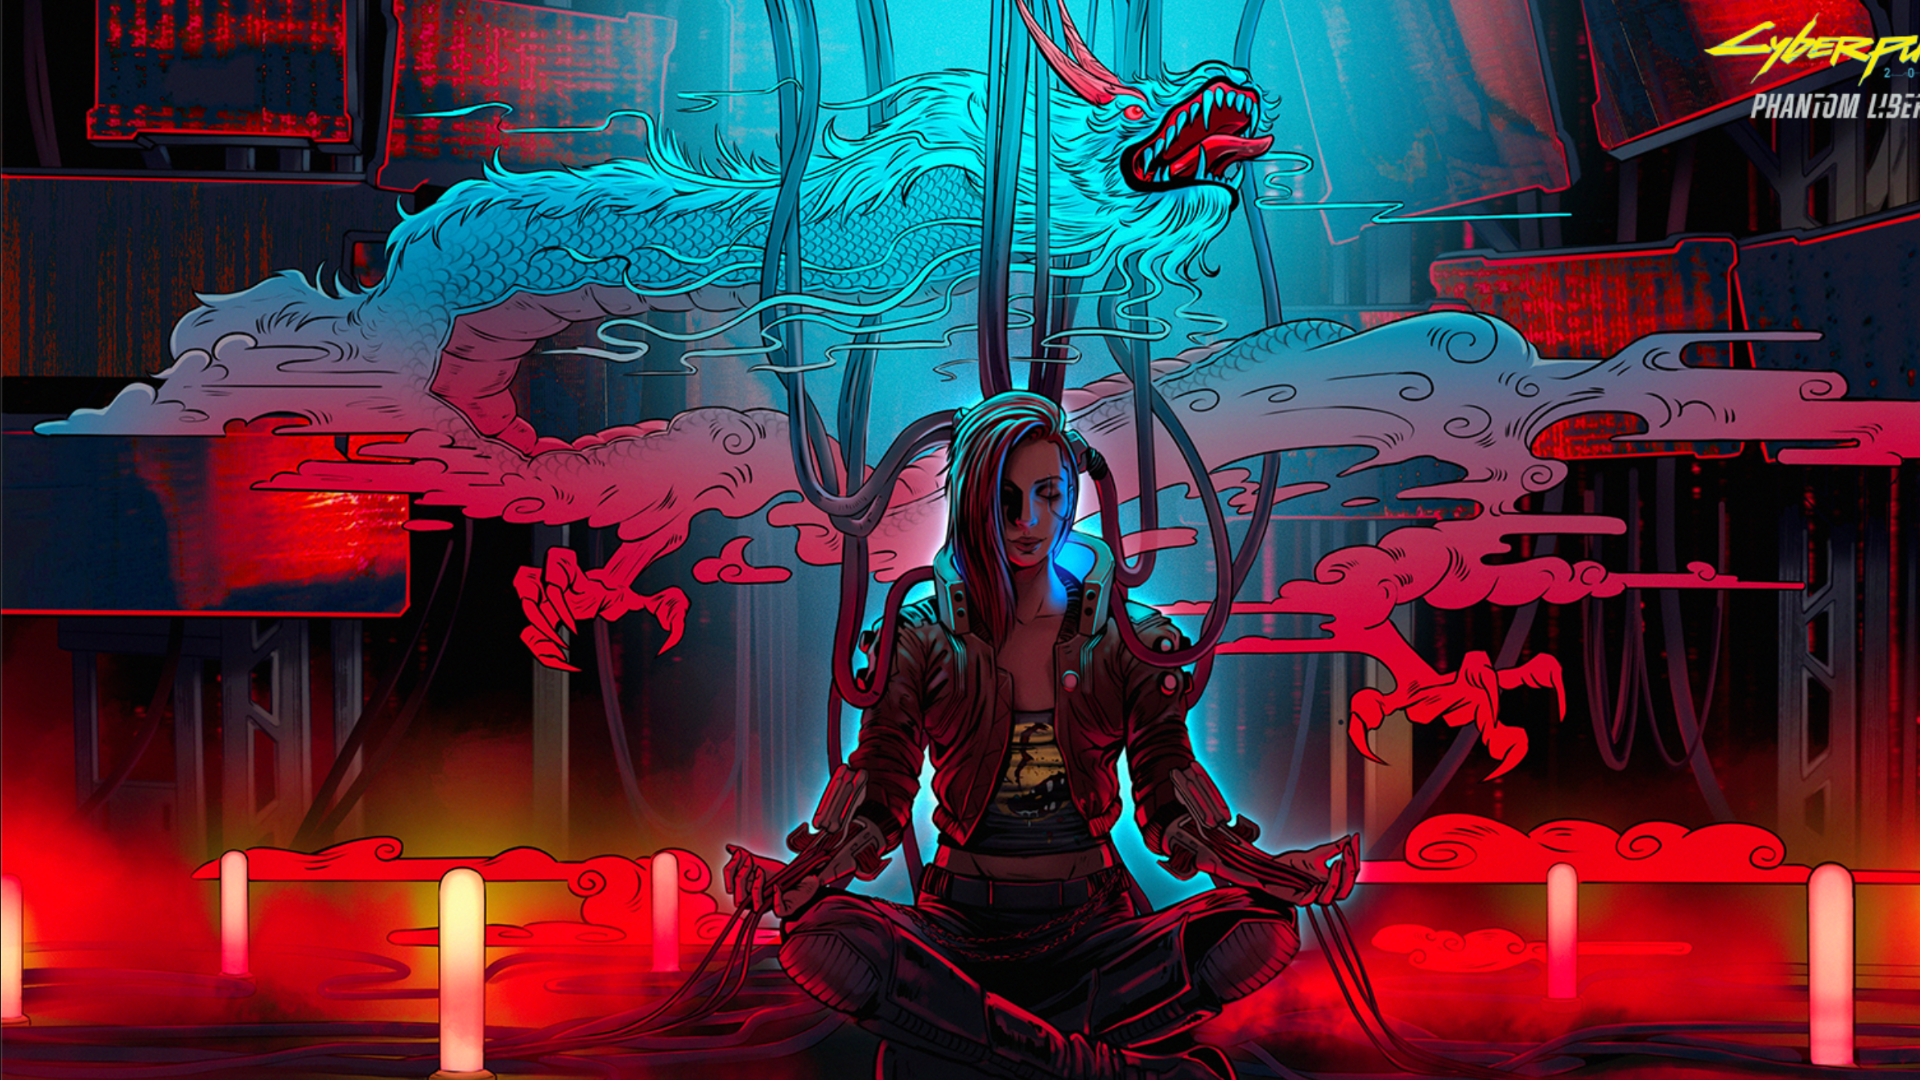 A cyberpunk character connected to futuristic cables meditates with a holographic dragon in the background, highlighting the vibrant and surreal elements of "Cyberpunk 2077: Phantom Liberty